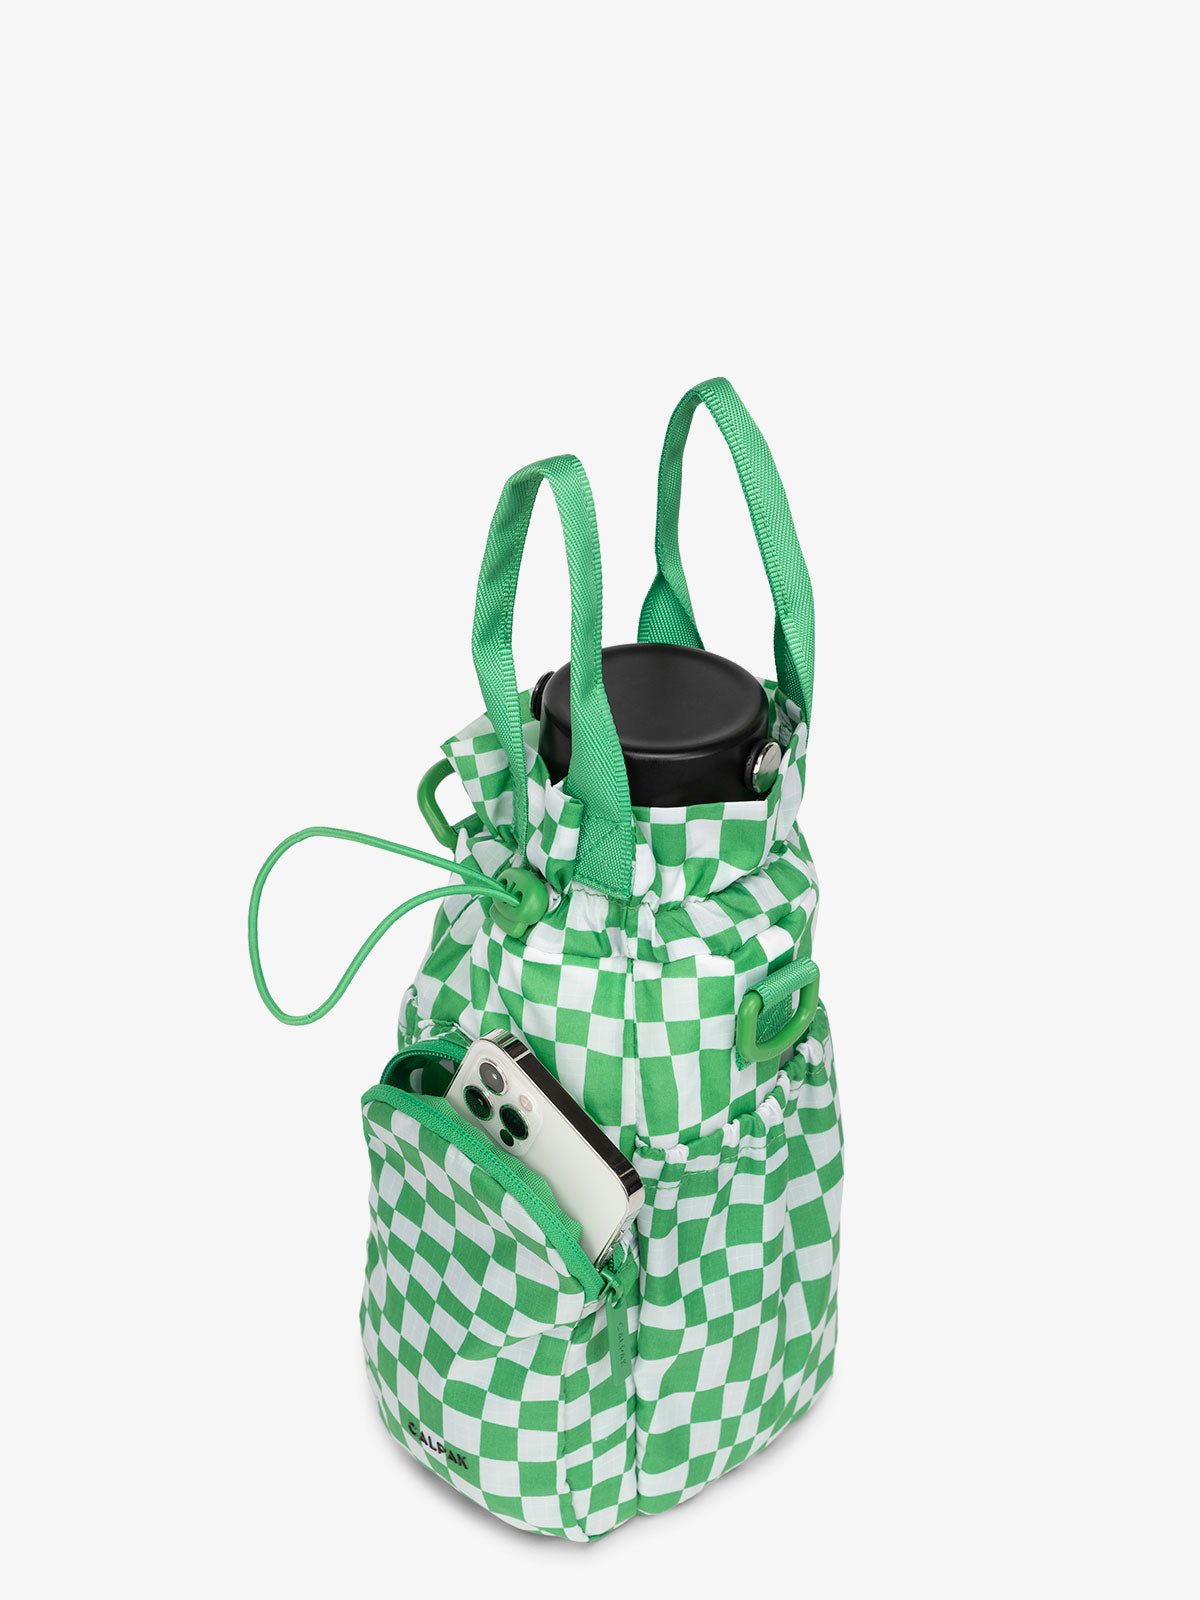 CALPAK Water Bottle carrier with zippered pocket in green checkerboard